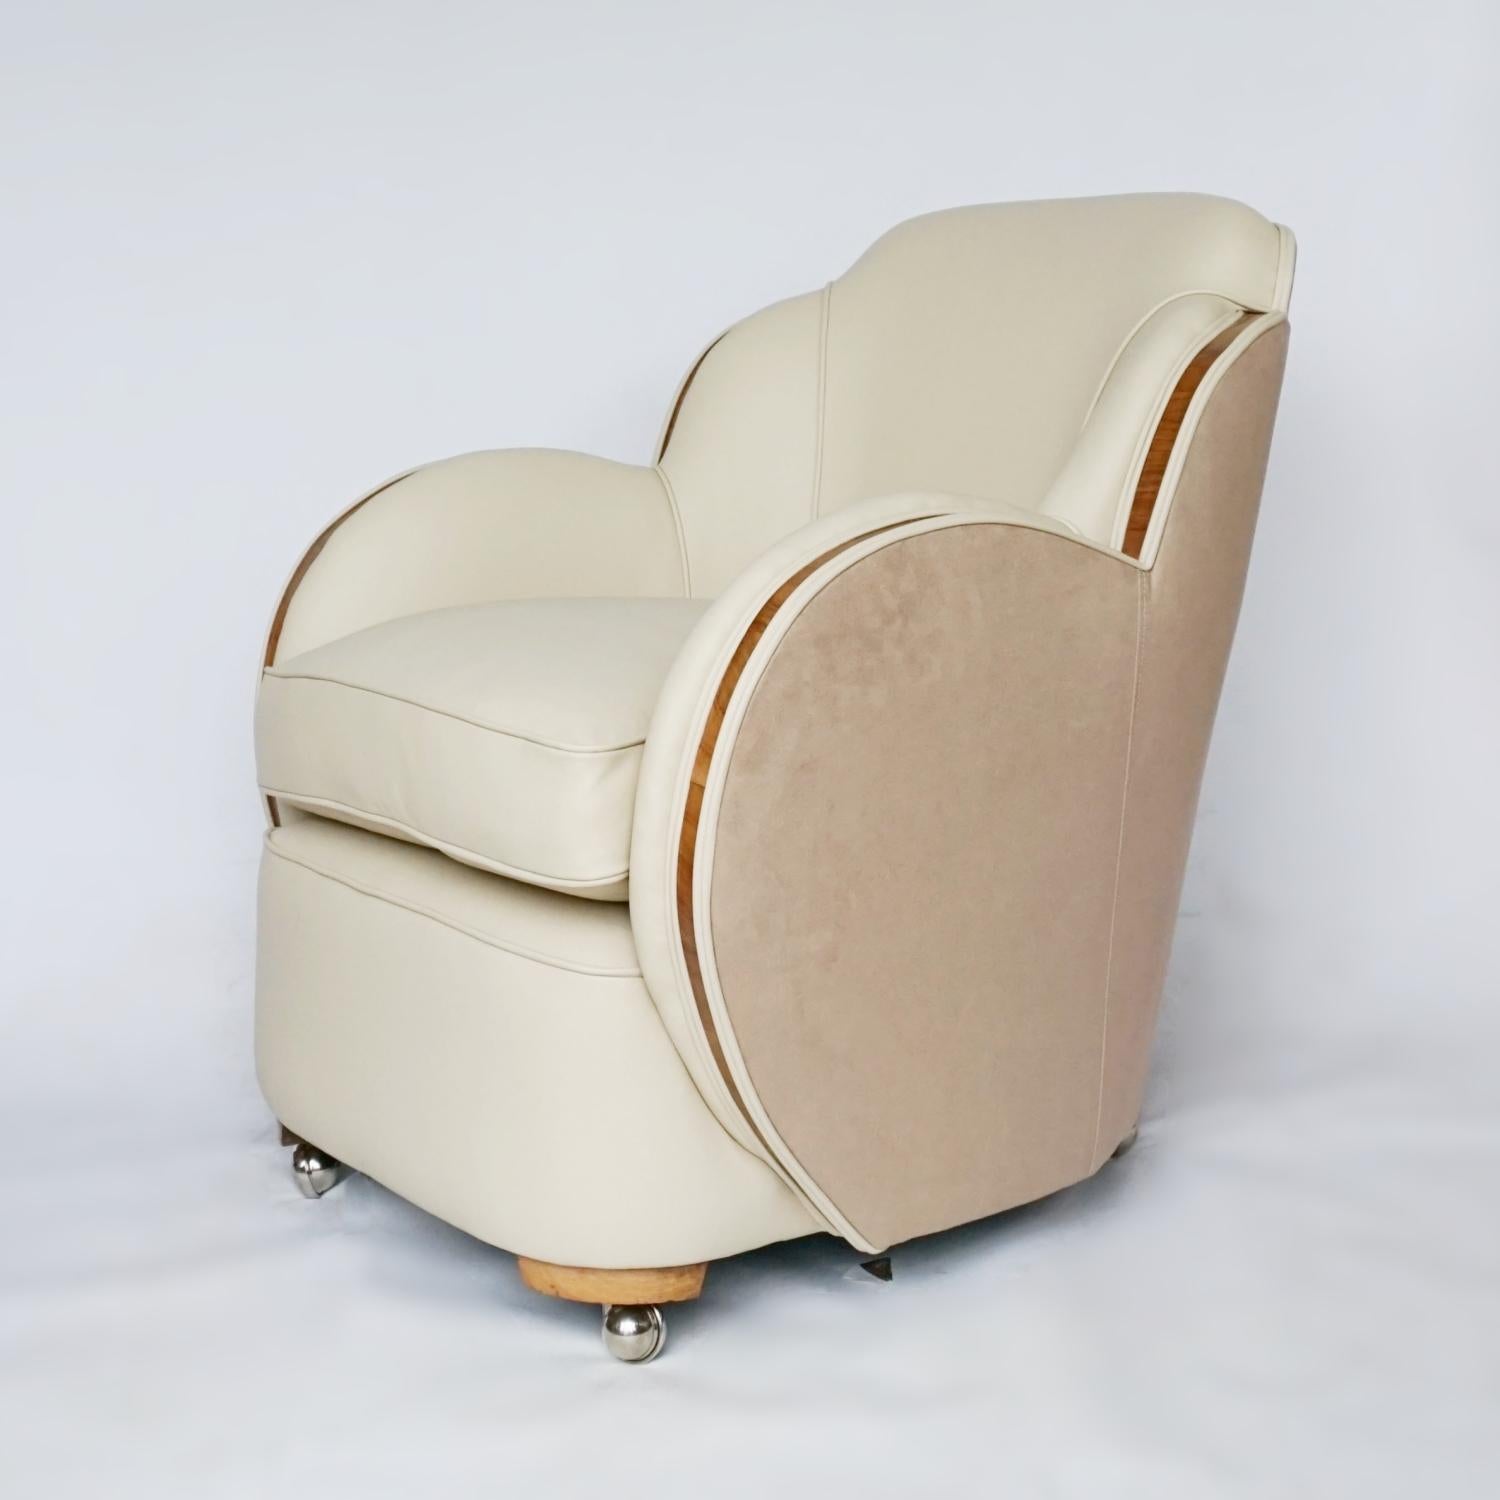 A Pair of Art Deco Cloud chairs by Harry & Lou Epstein. Re-upholstered in cream leather with a contrasting faux suede to sides and back. Figured walnut banding to the sides. Replacement casters. 

Dimensions: H 84cm W 72cm D 65m Seat H 50cm D